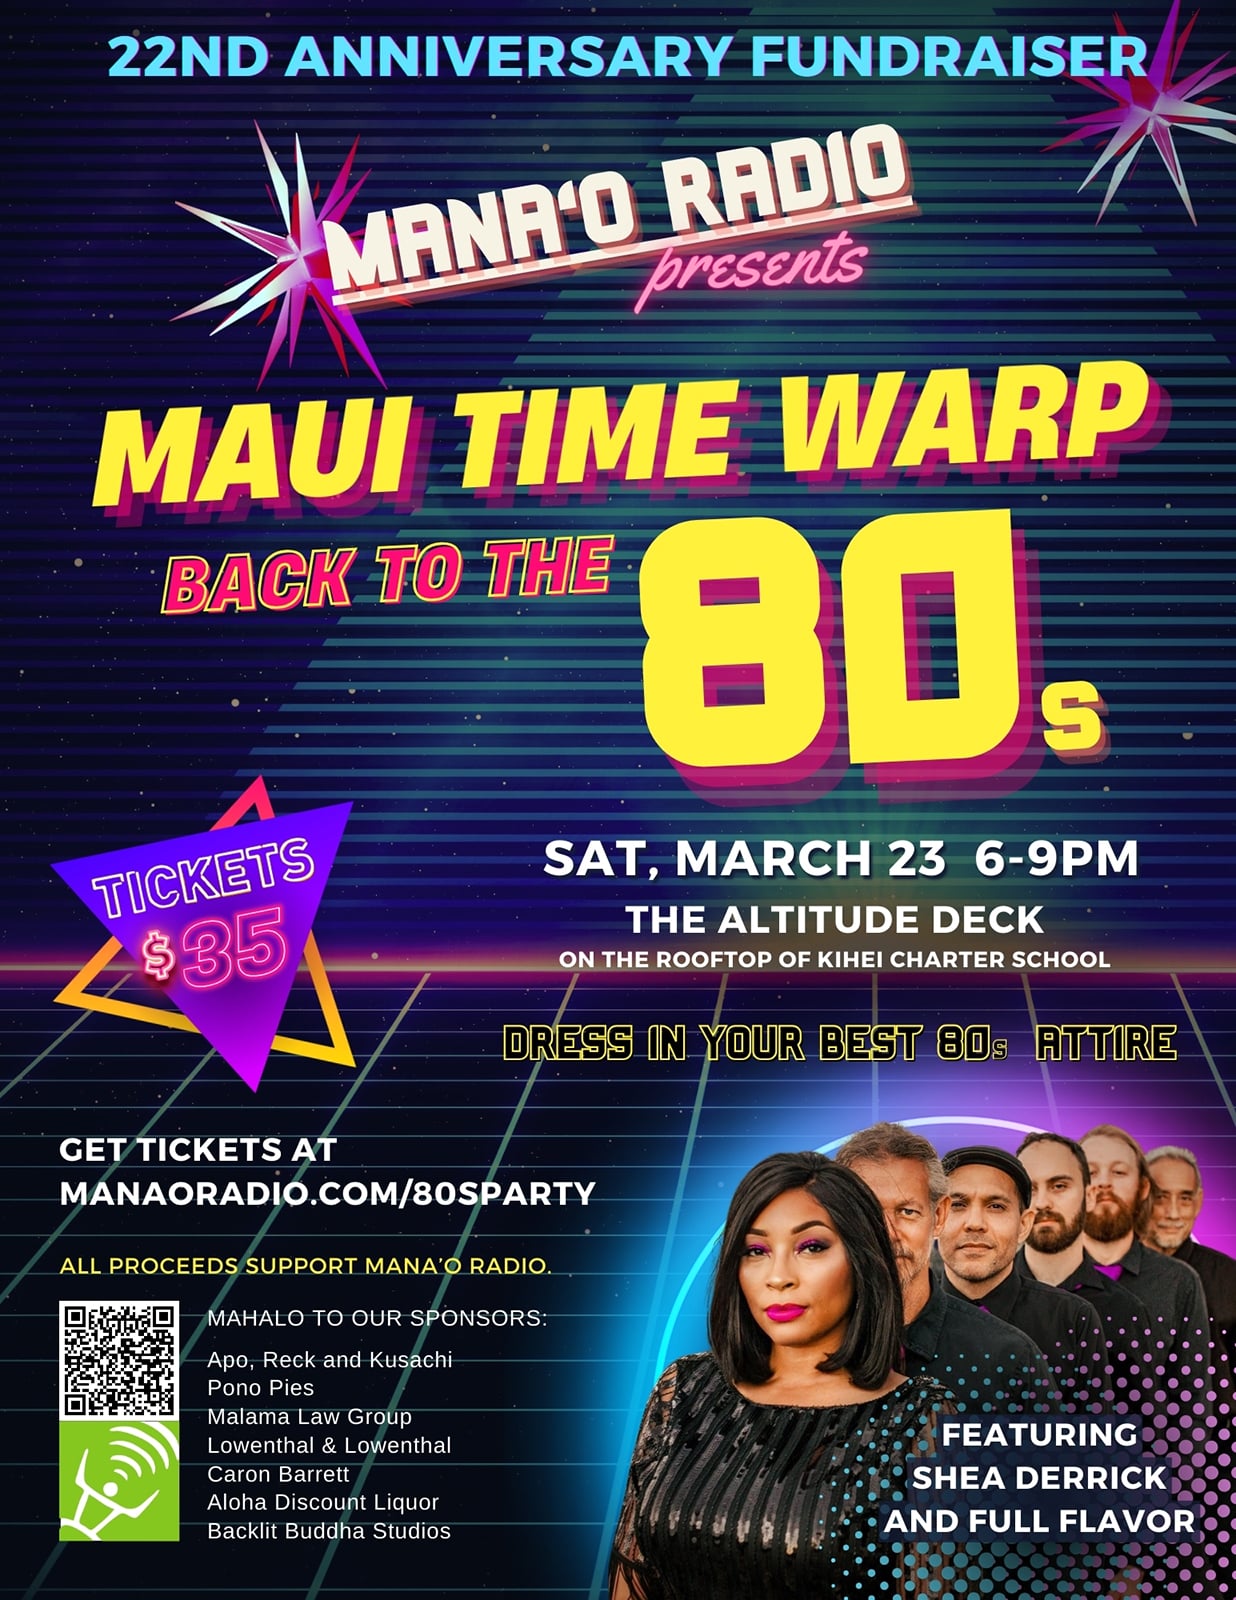 Cue the air guitar solo, dust off your leg warmers, and prepare to unleash your inner neon ninja – because BEST OF MAUI RADIO STATION WINNER Mana'o Radio, is throwin' an 80s bash to celebrate our 22nd anniversary you won't wanna miss!